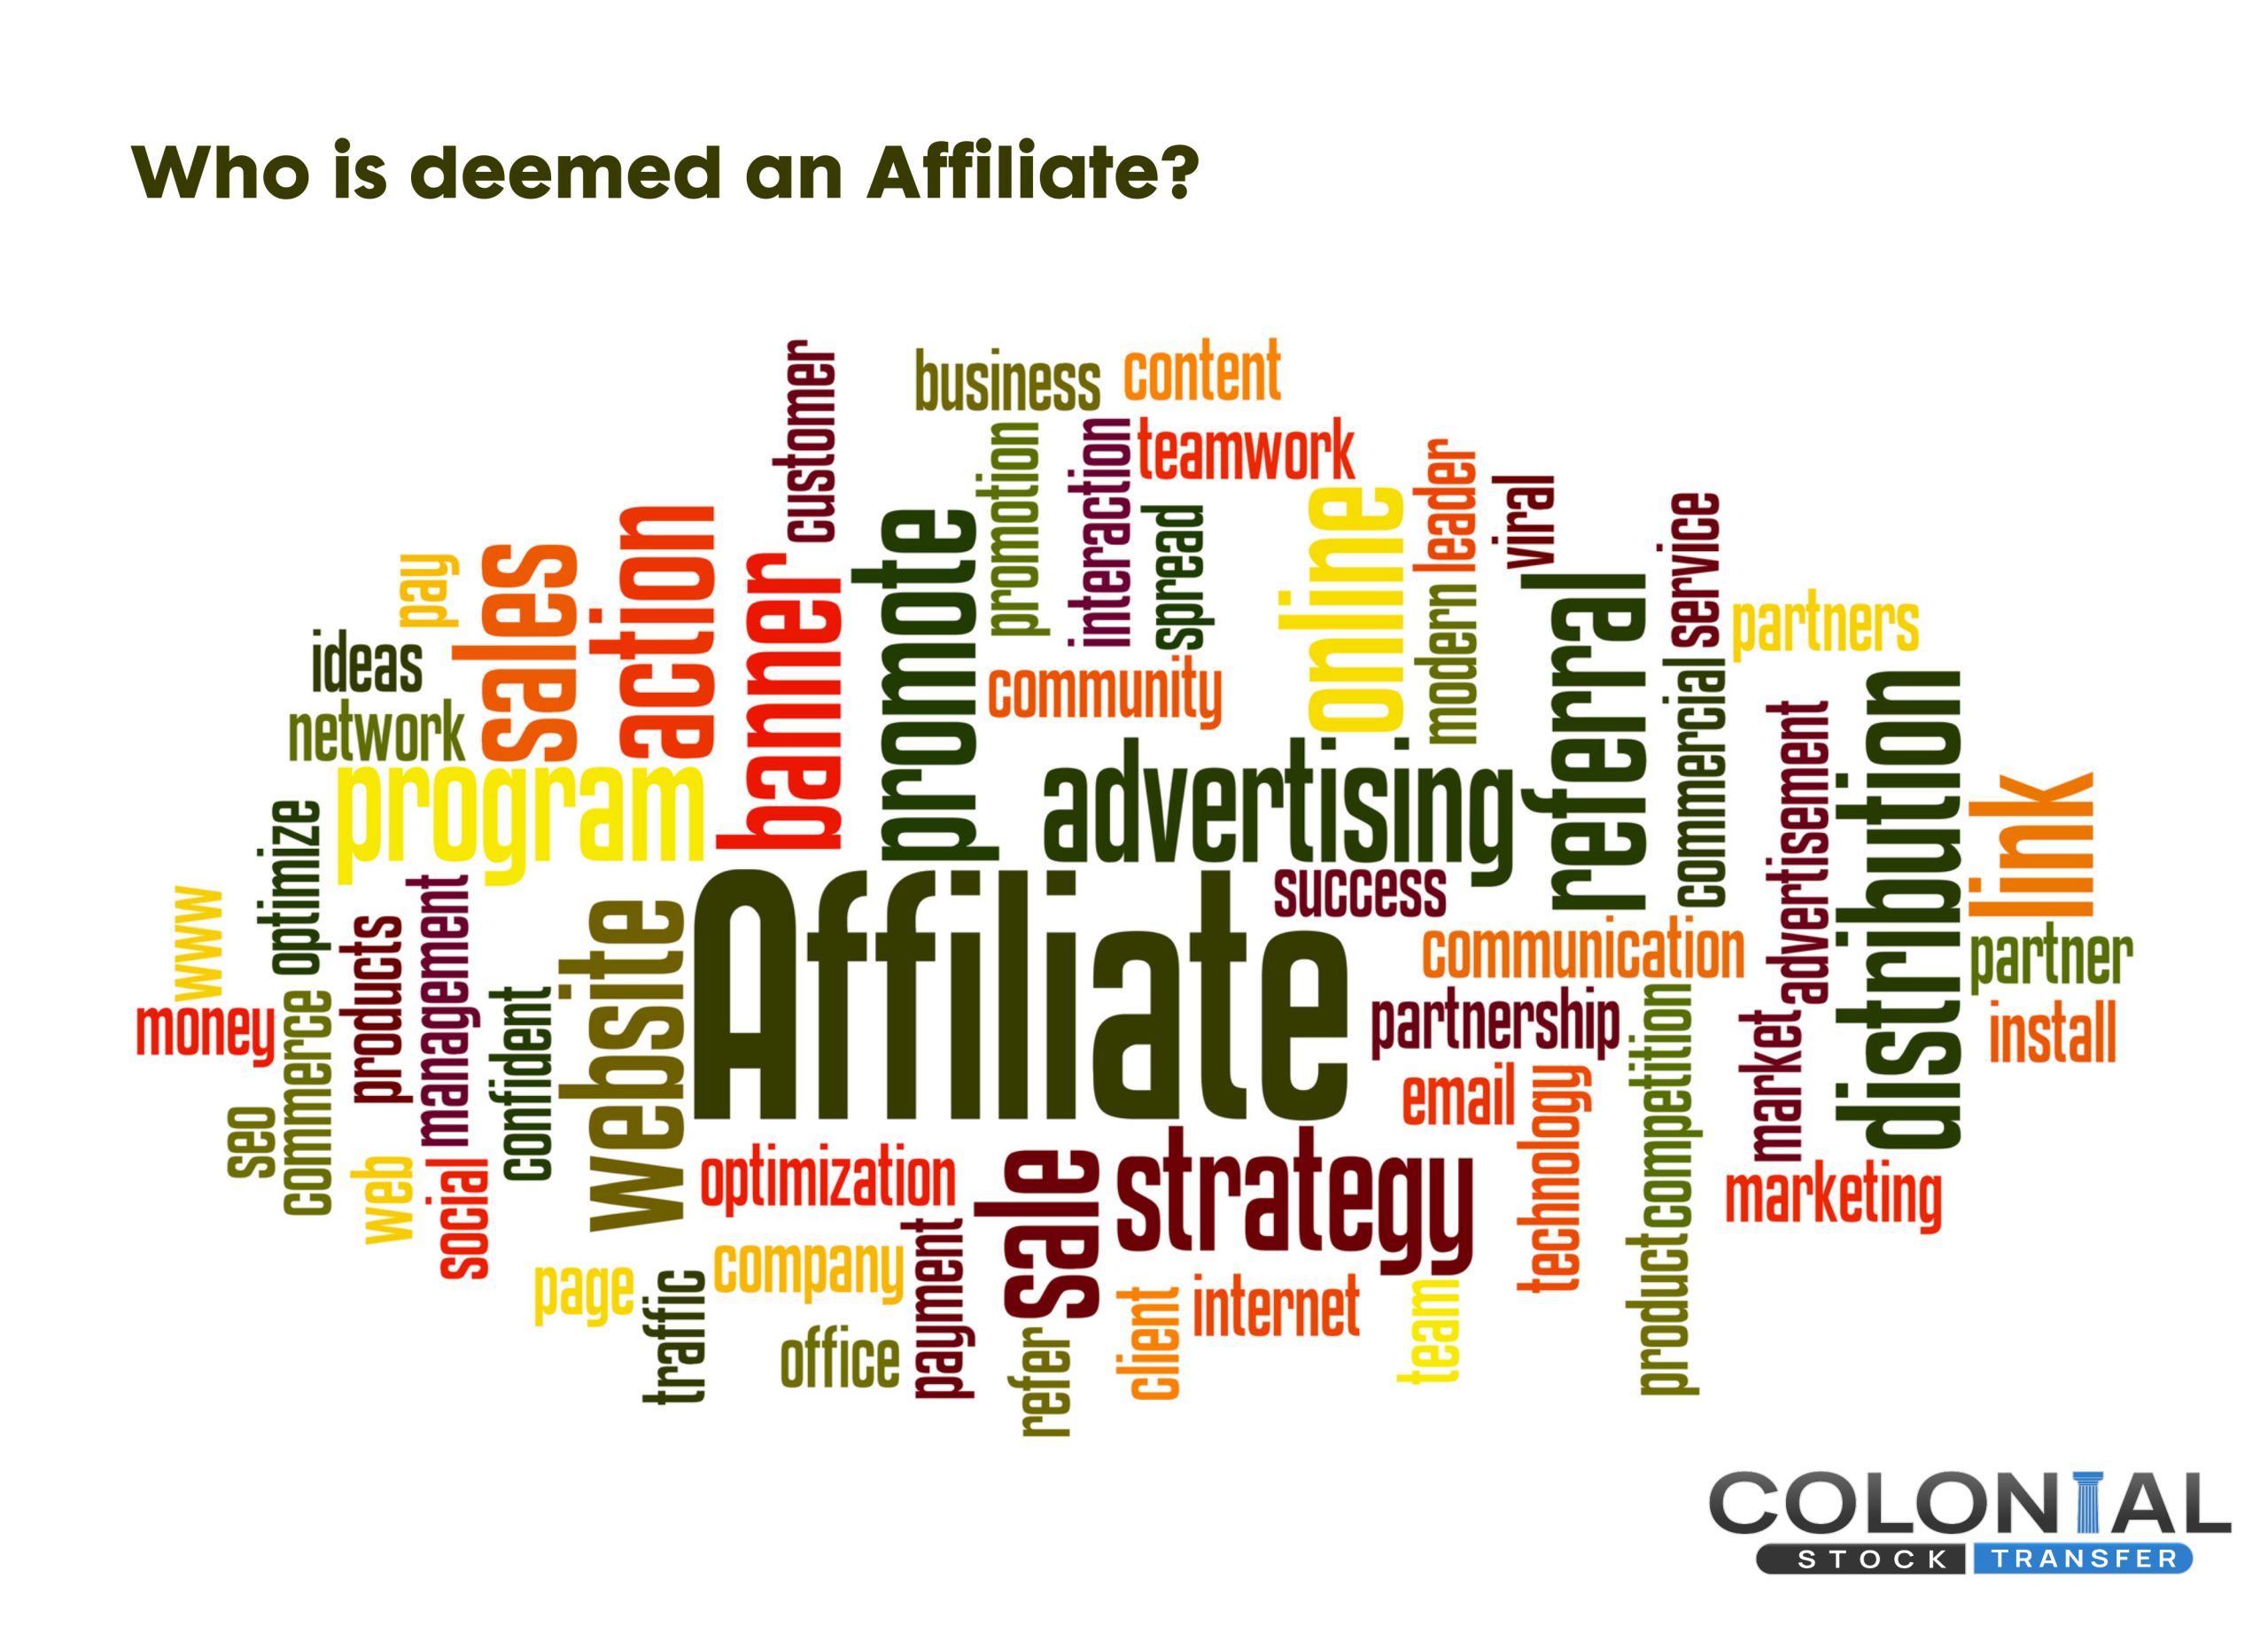 Who is deemed an Affiliate?